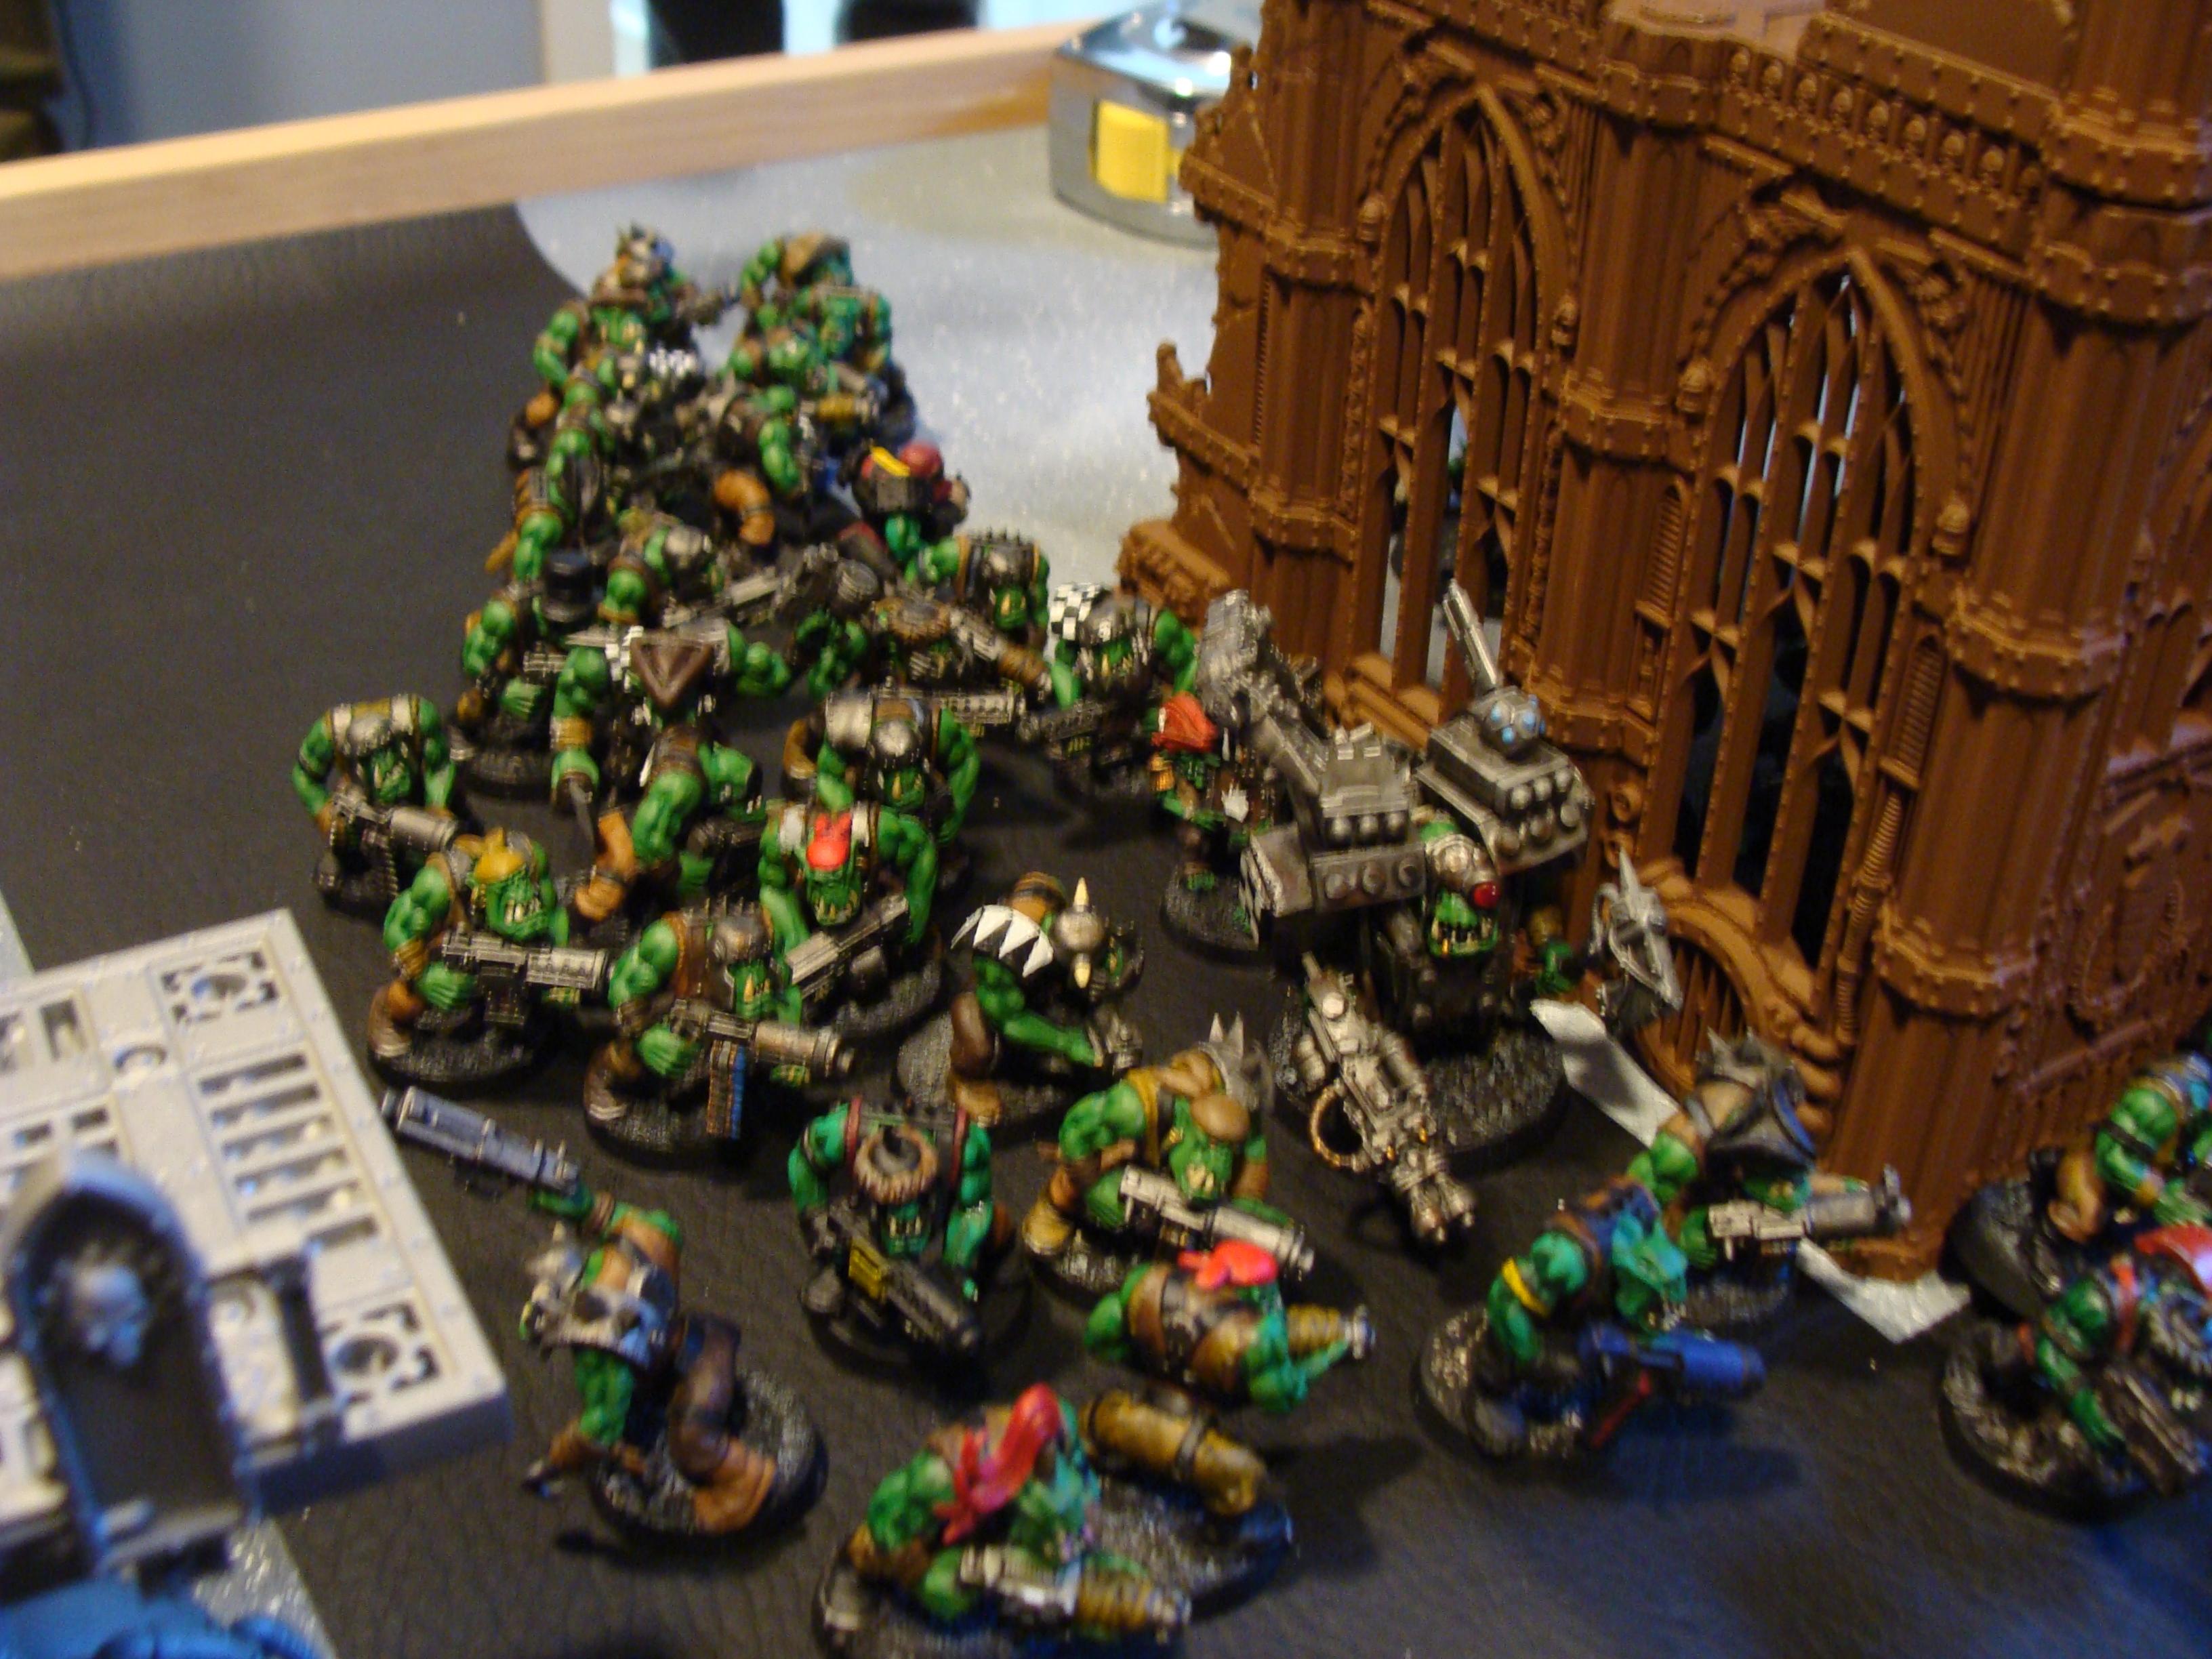 Battle Report, Imperial Knights, Orks